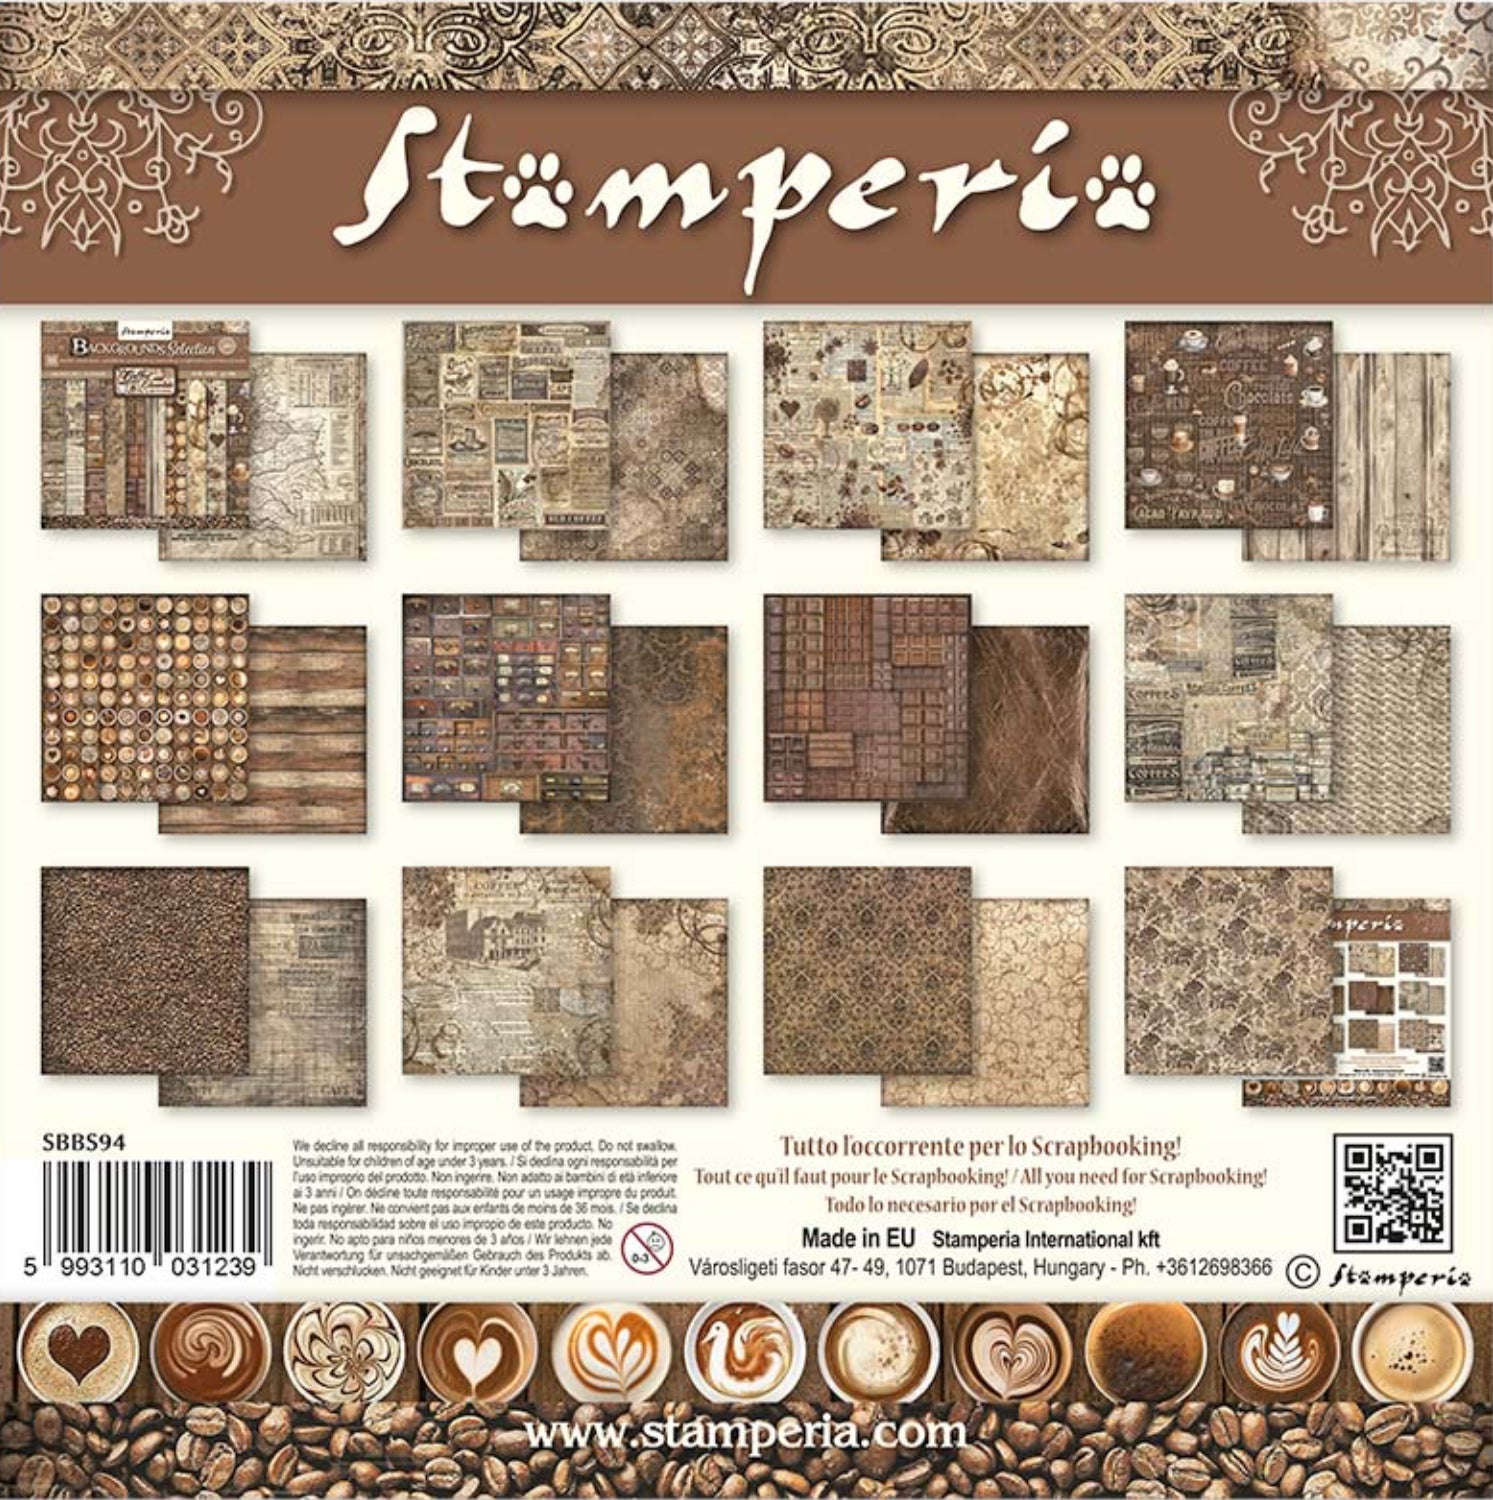 Stamperia Coffee and Chocolate Backgrounds Selection 8x8 Paper Sbbs94